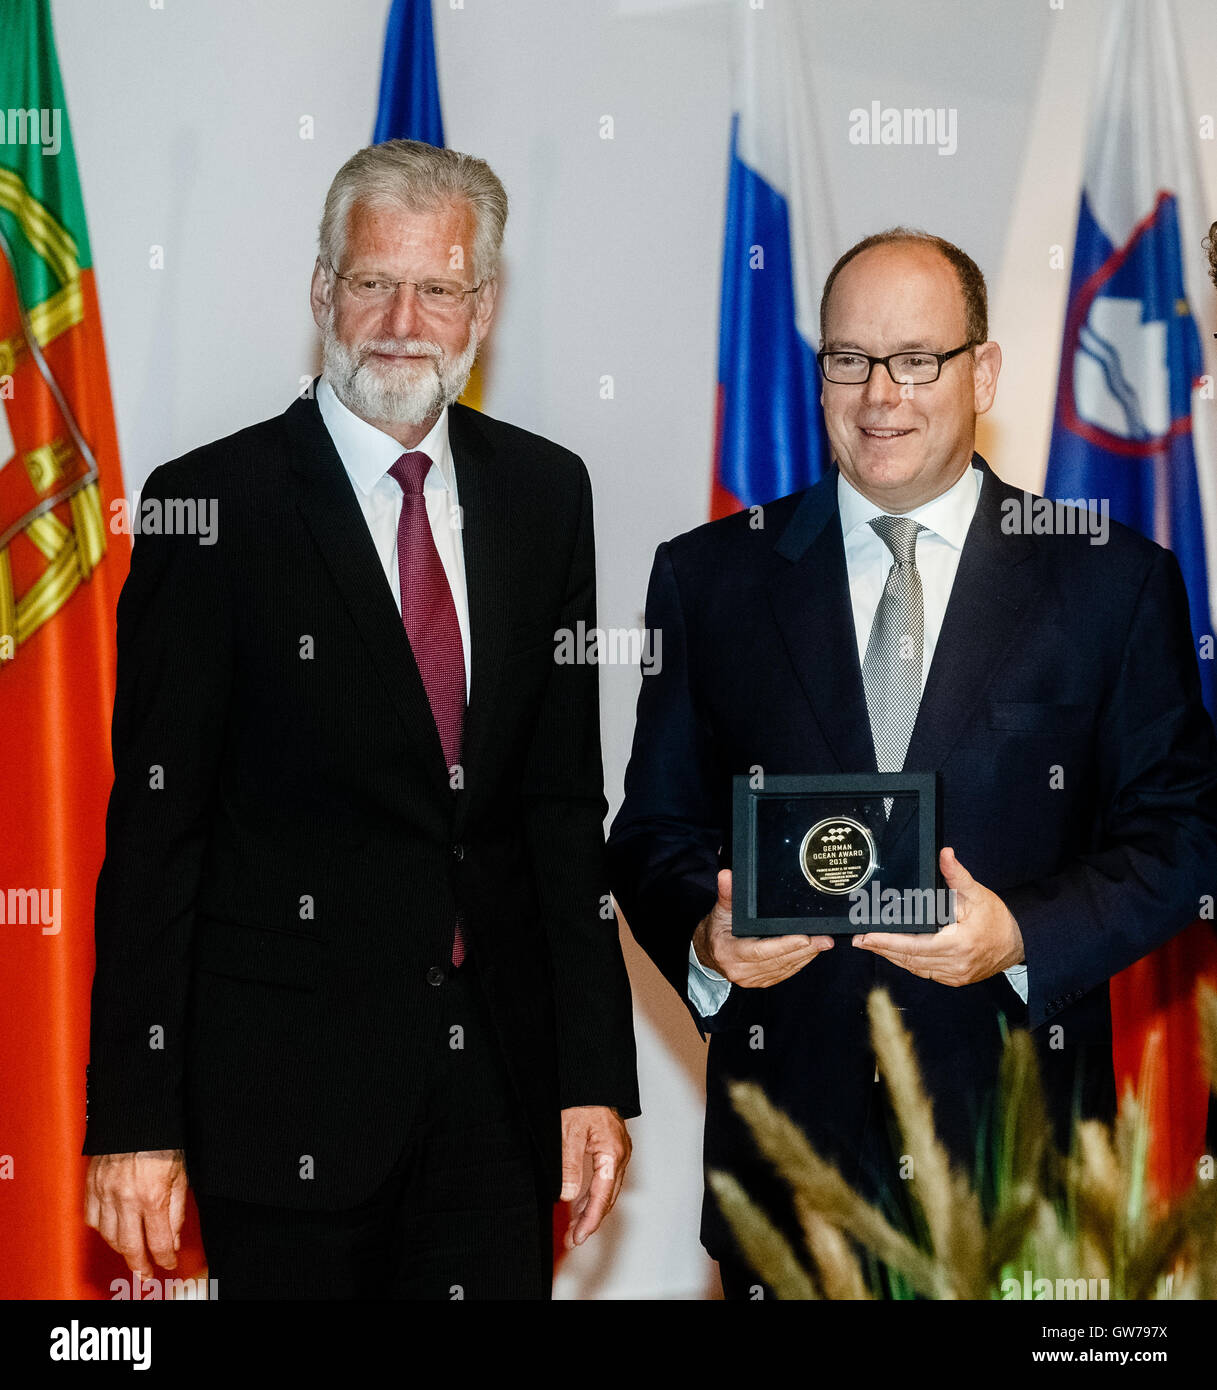 Kiel, Germany. 12th Sep, 2016. Albert II, Prince of Monaco (R), poses with Peter Herzig, director of the GEOMAR ocean research center, after receiving the German Ocean Award 2016 in Kiel, Germany, 12 September 2016. Prince Albert was awarded for his engagement in protecting the oceans. Photo: MARKUS SCHOLZ/dpa/Alamy Live News Stock Photo